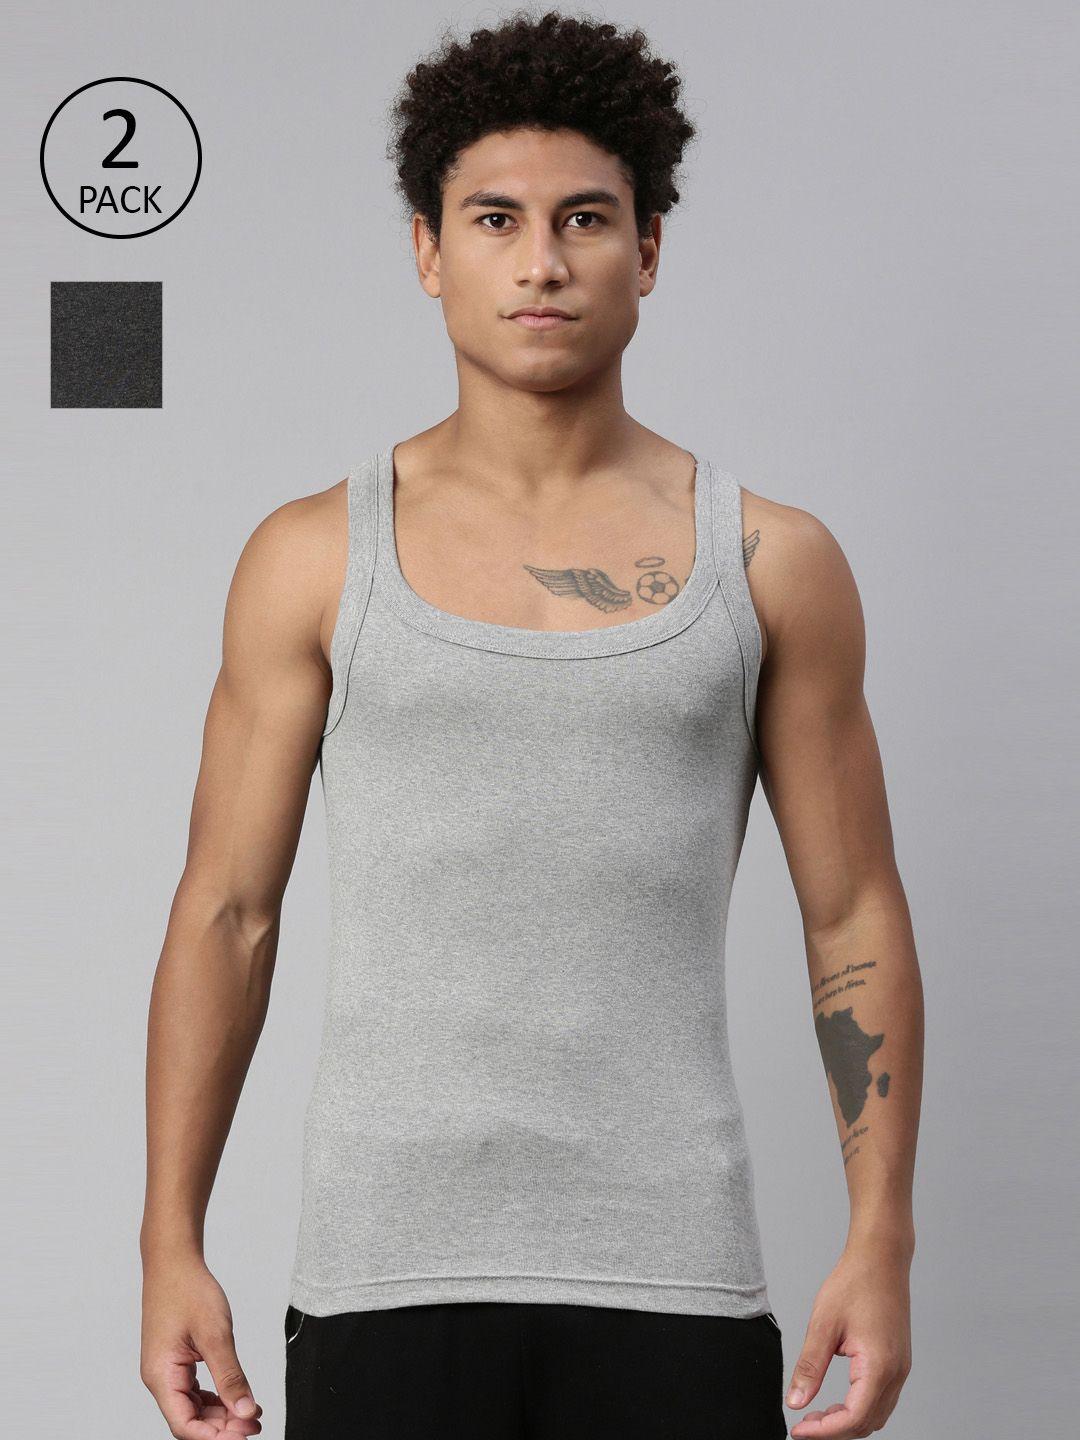 levis-men-pack-of-2-smartskin-technology-cotton-sports-vests-with-tag-free-comfort-015